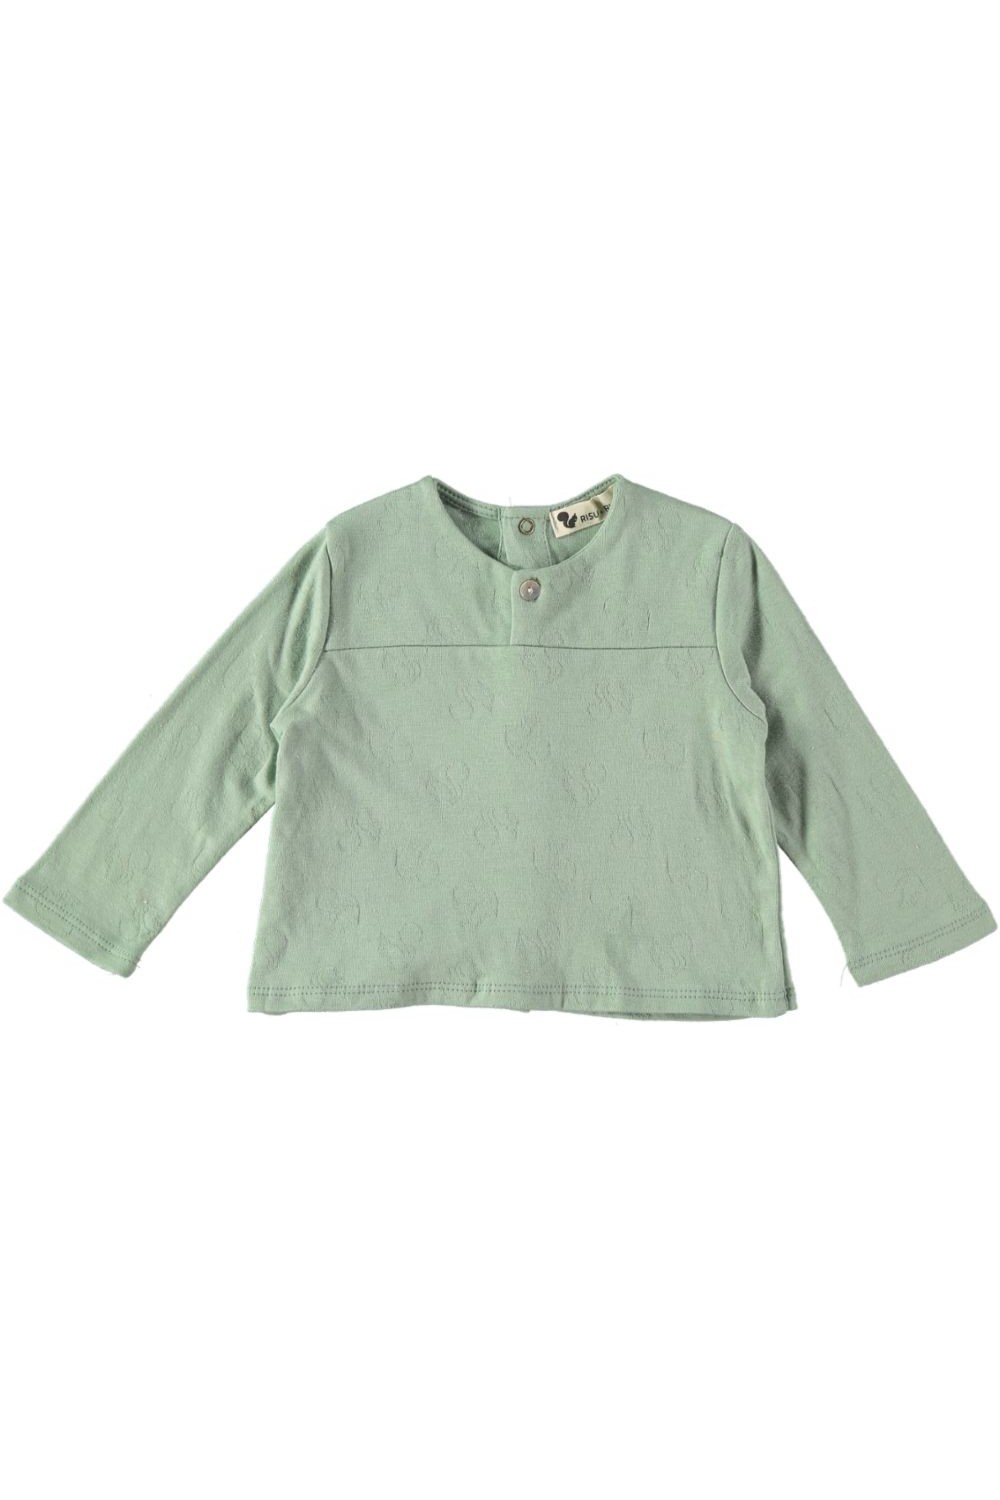 Baby blouse in organic cotton jersey - from 3 months to 3 years - Risu-Risu